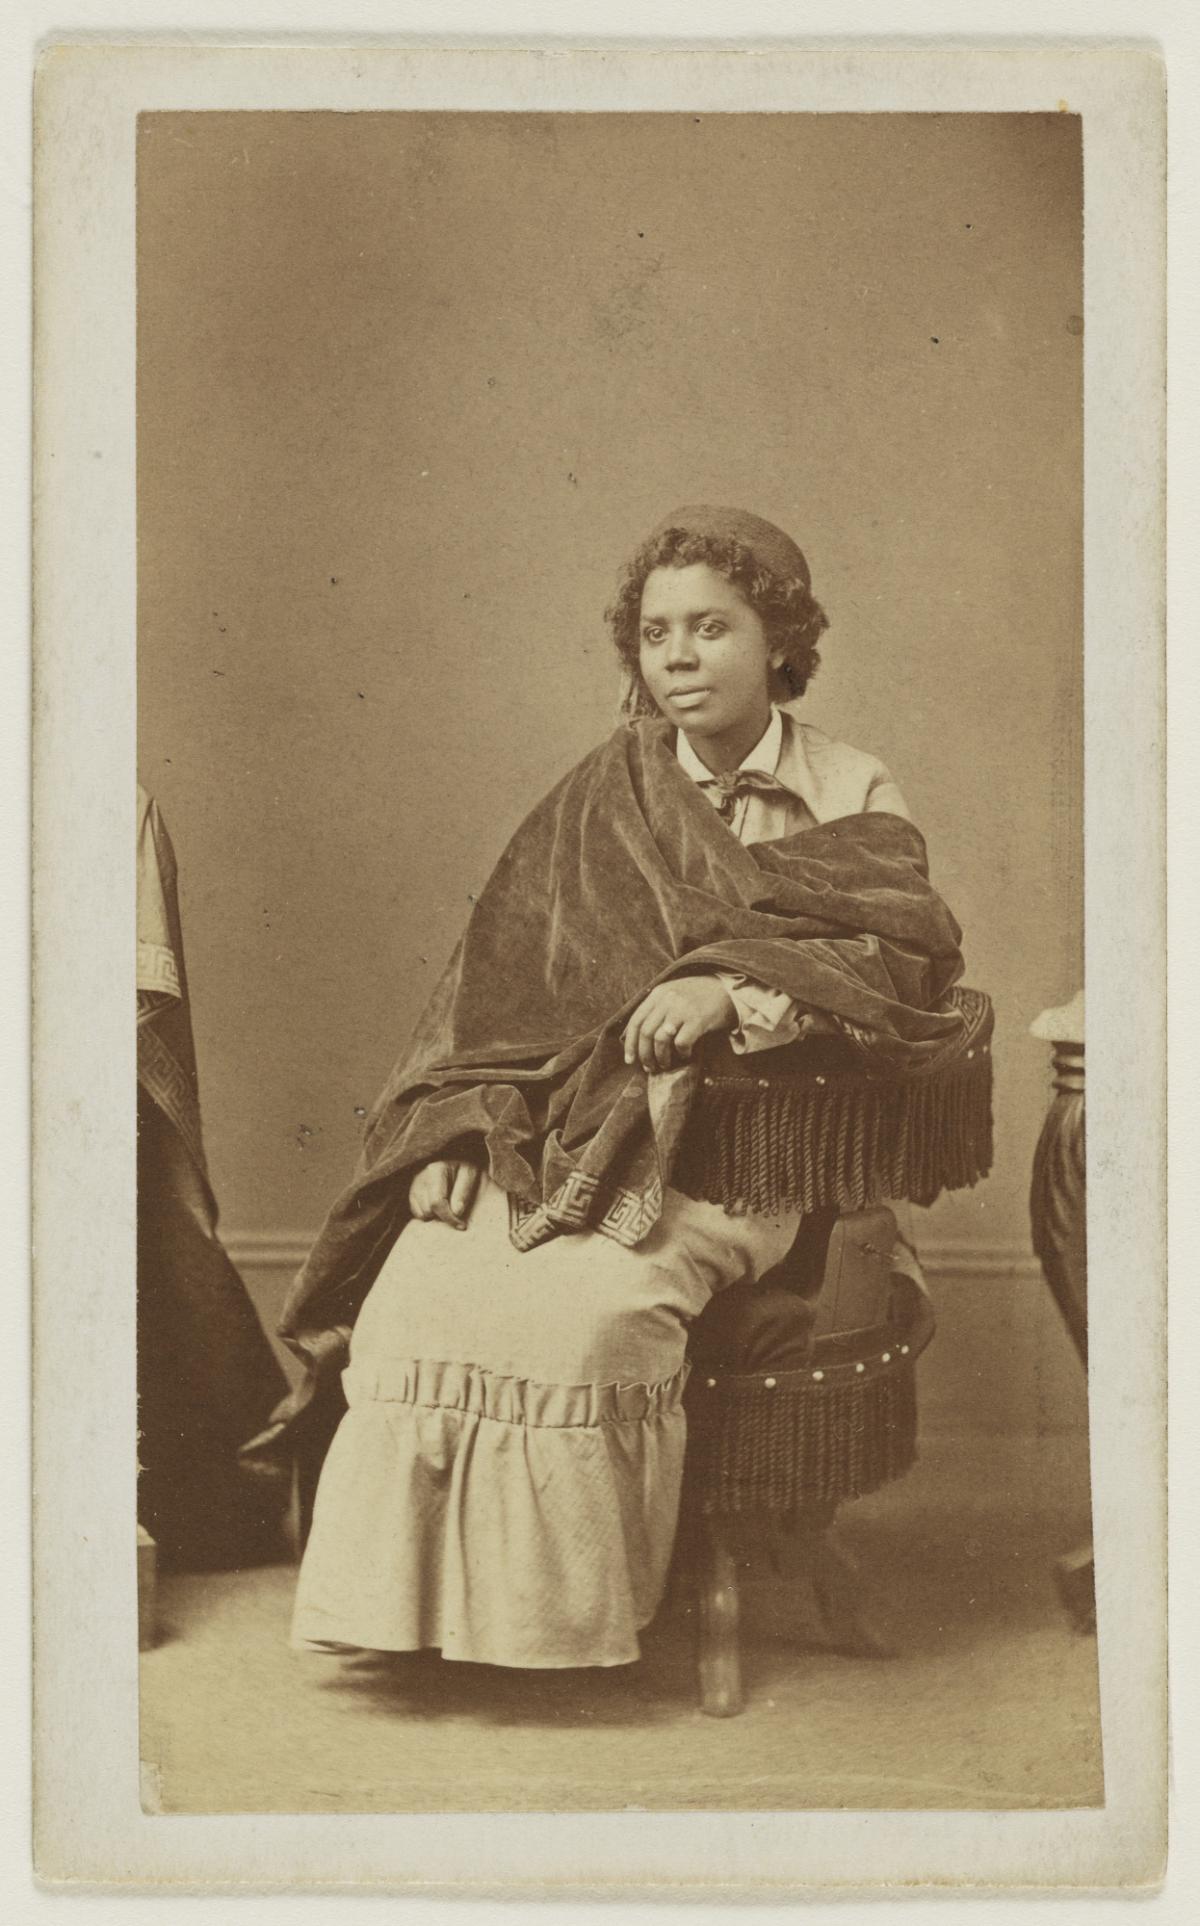 An African American woman sitting in a chair wearing a shawl